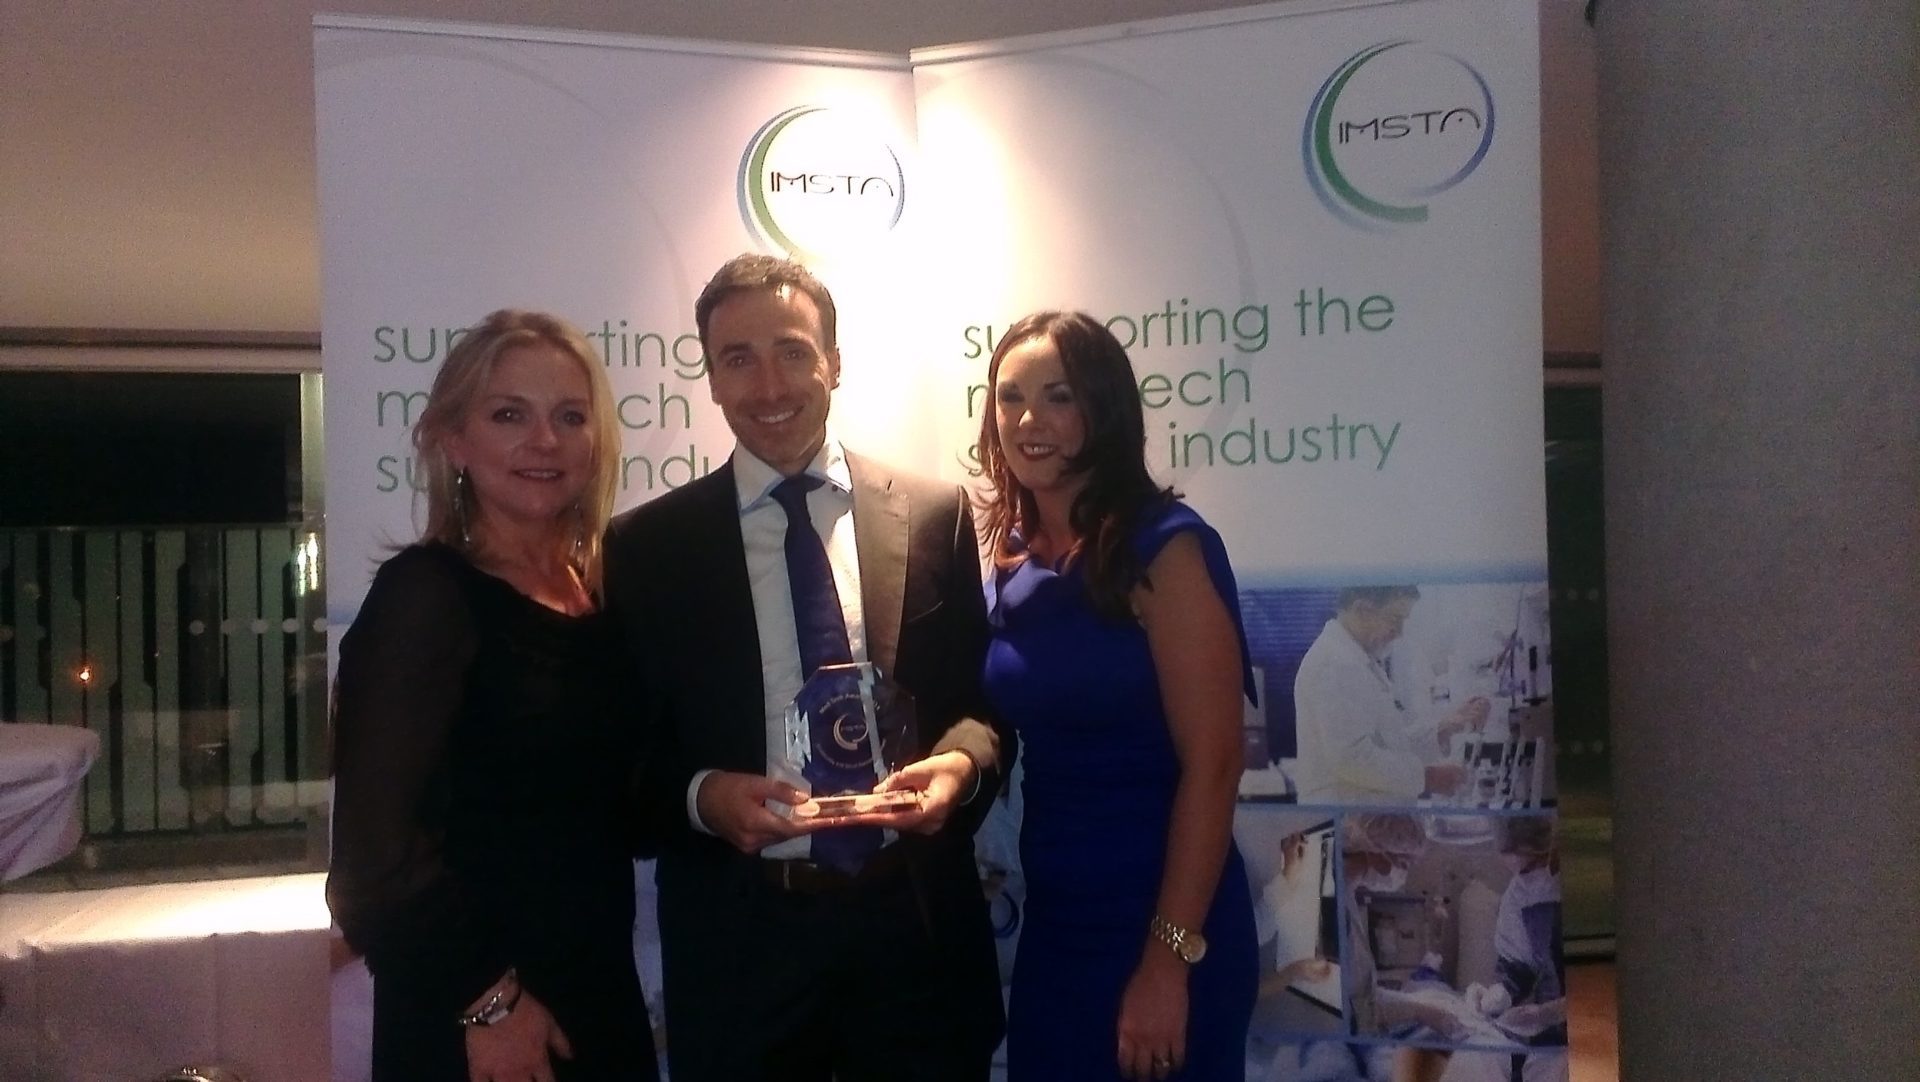 Pictured: Michelle Condell of Bayer, Gary Brady of Diabetes Ireland and Donna McCormick of Medtronic.